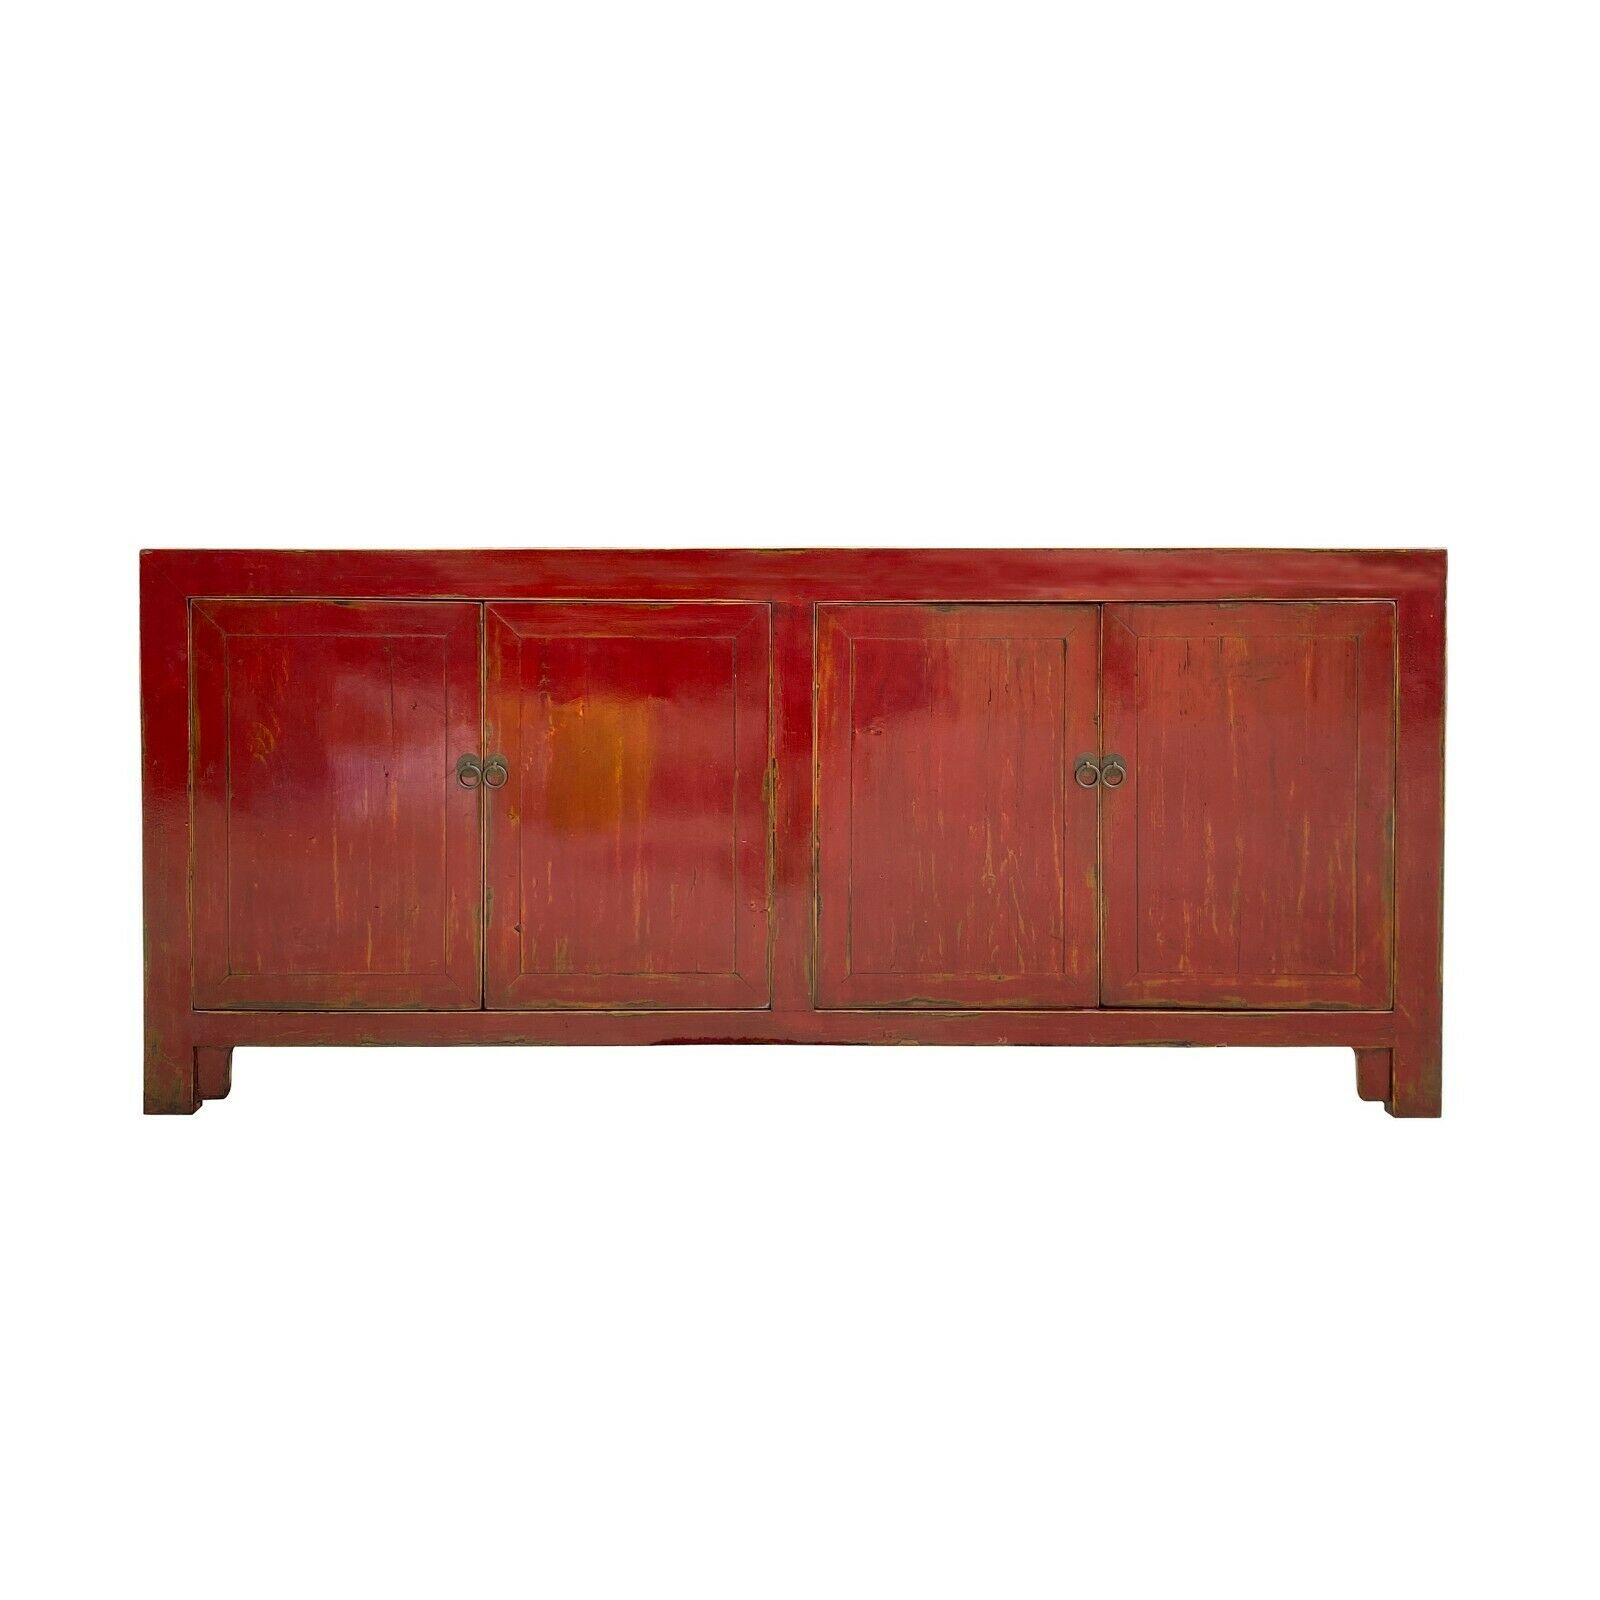 Distressed Brick Bright Red Finish Low Credenza Tv Console Buffet Table Cs6938